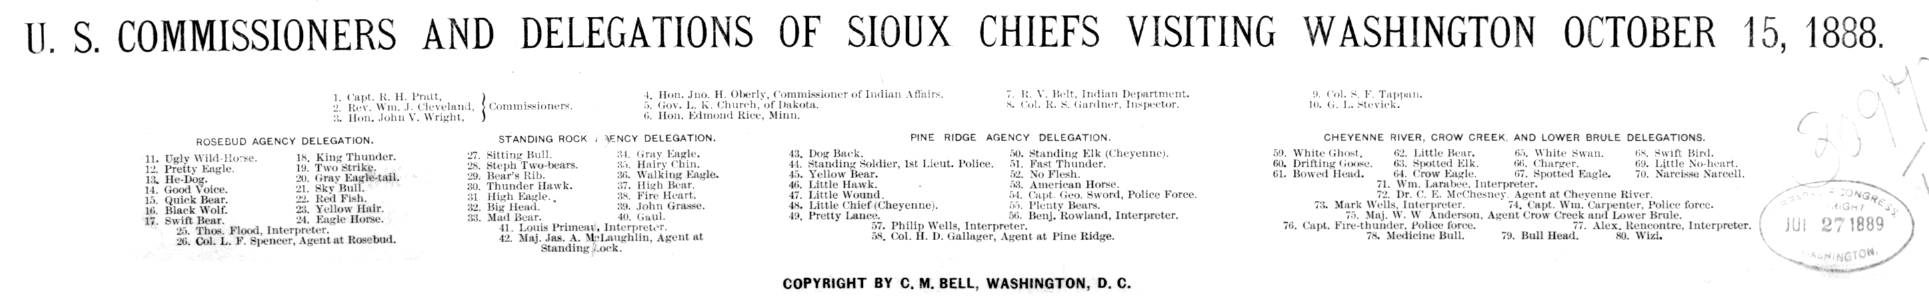 text of 1888 Sioux Commission photo